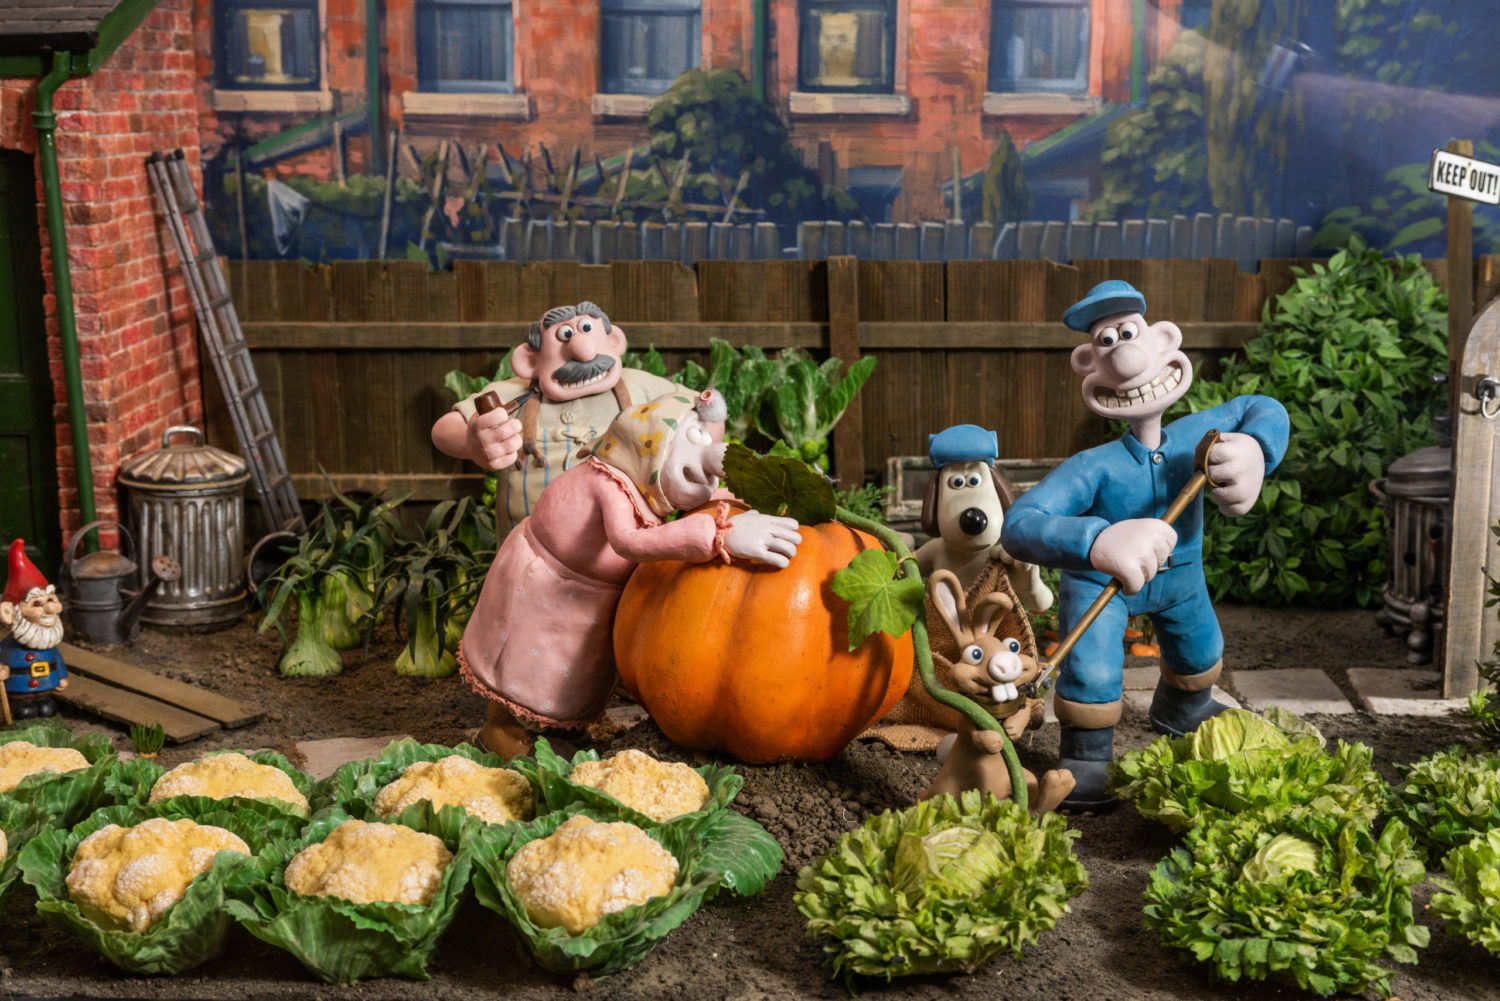 Plasticine models of Wallace, Gromit, an old lady and man and a rabbit digging up a giant pumpkin in a garden.